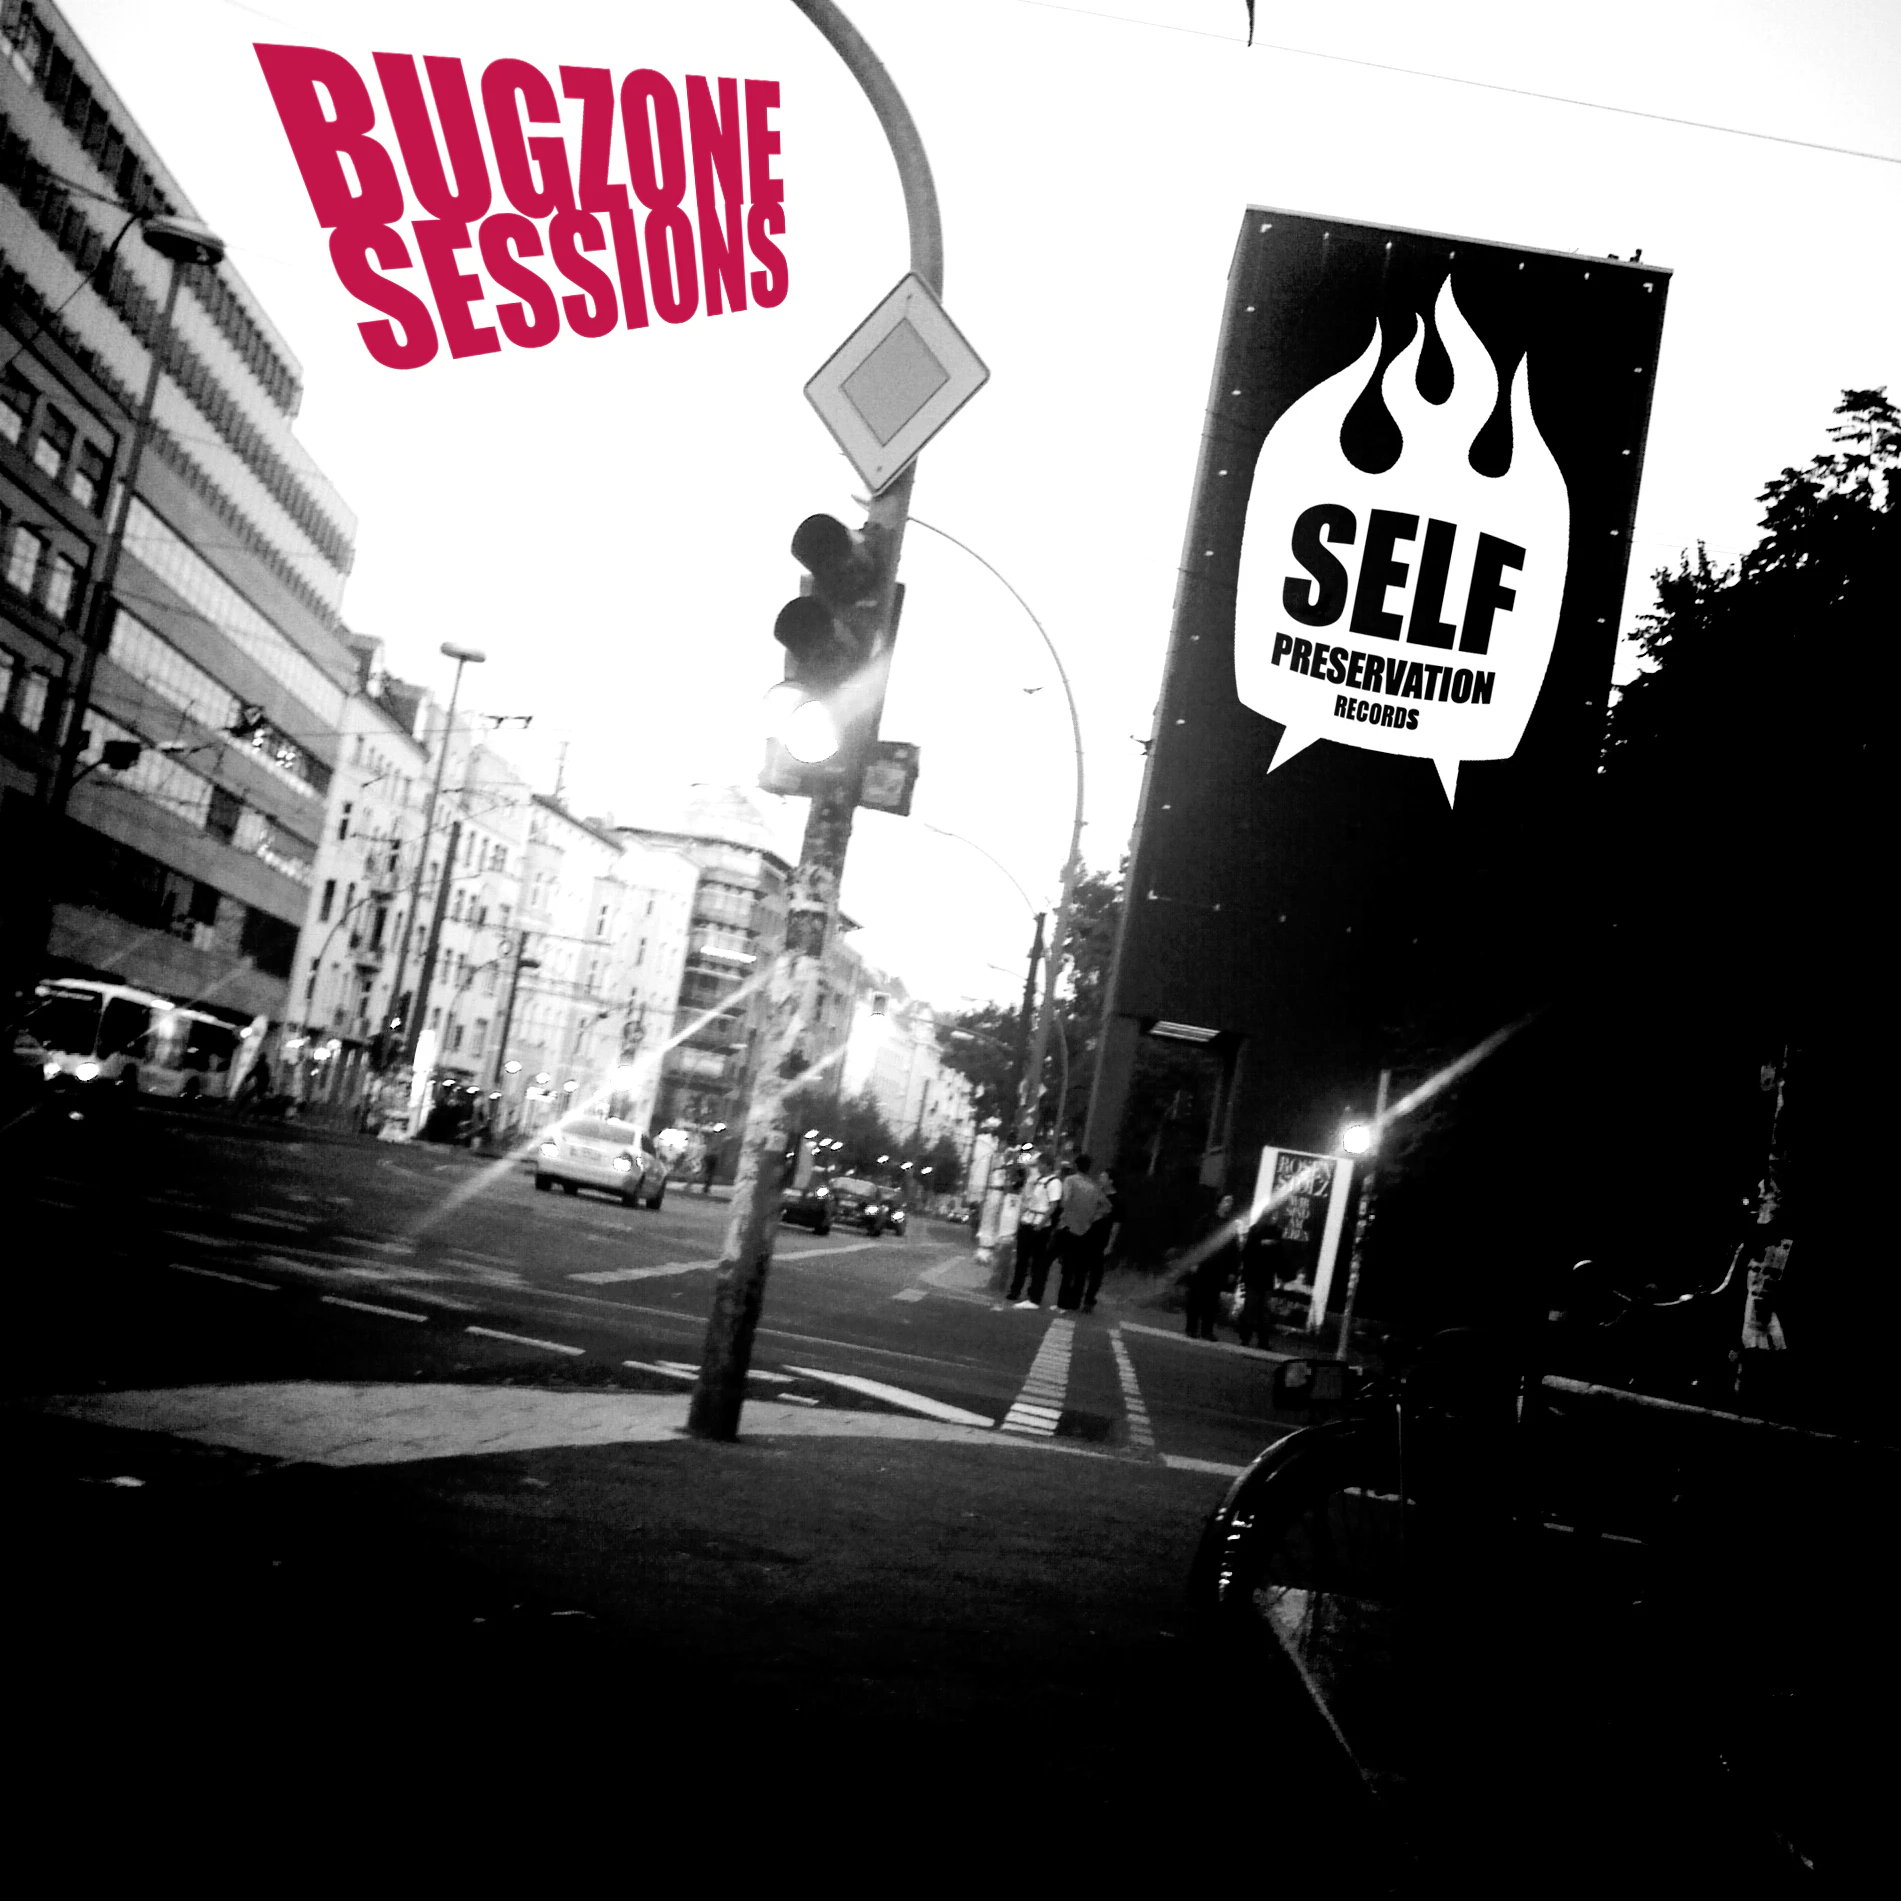 THE BUGZONE SESSIONS | No.1 - Milwalkie, 'Open Fields'